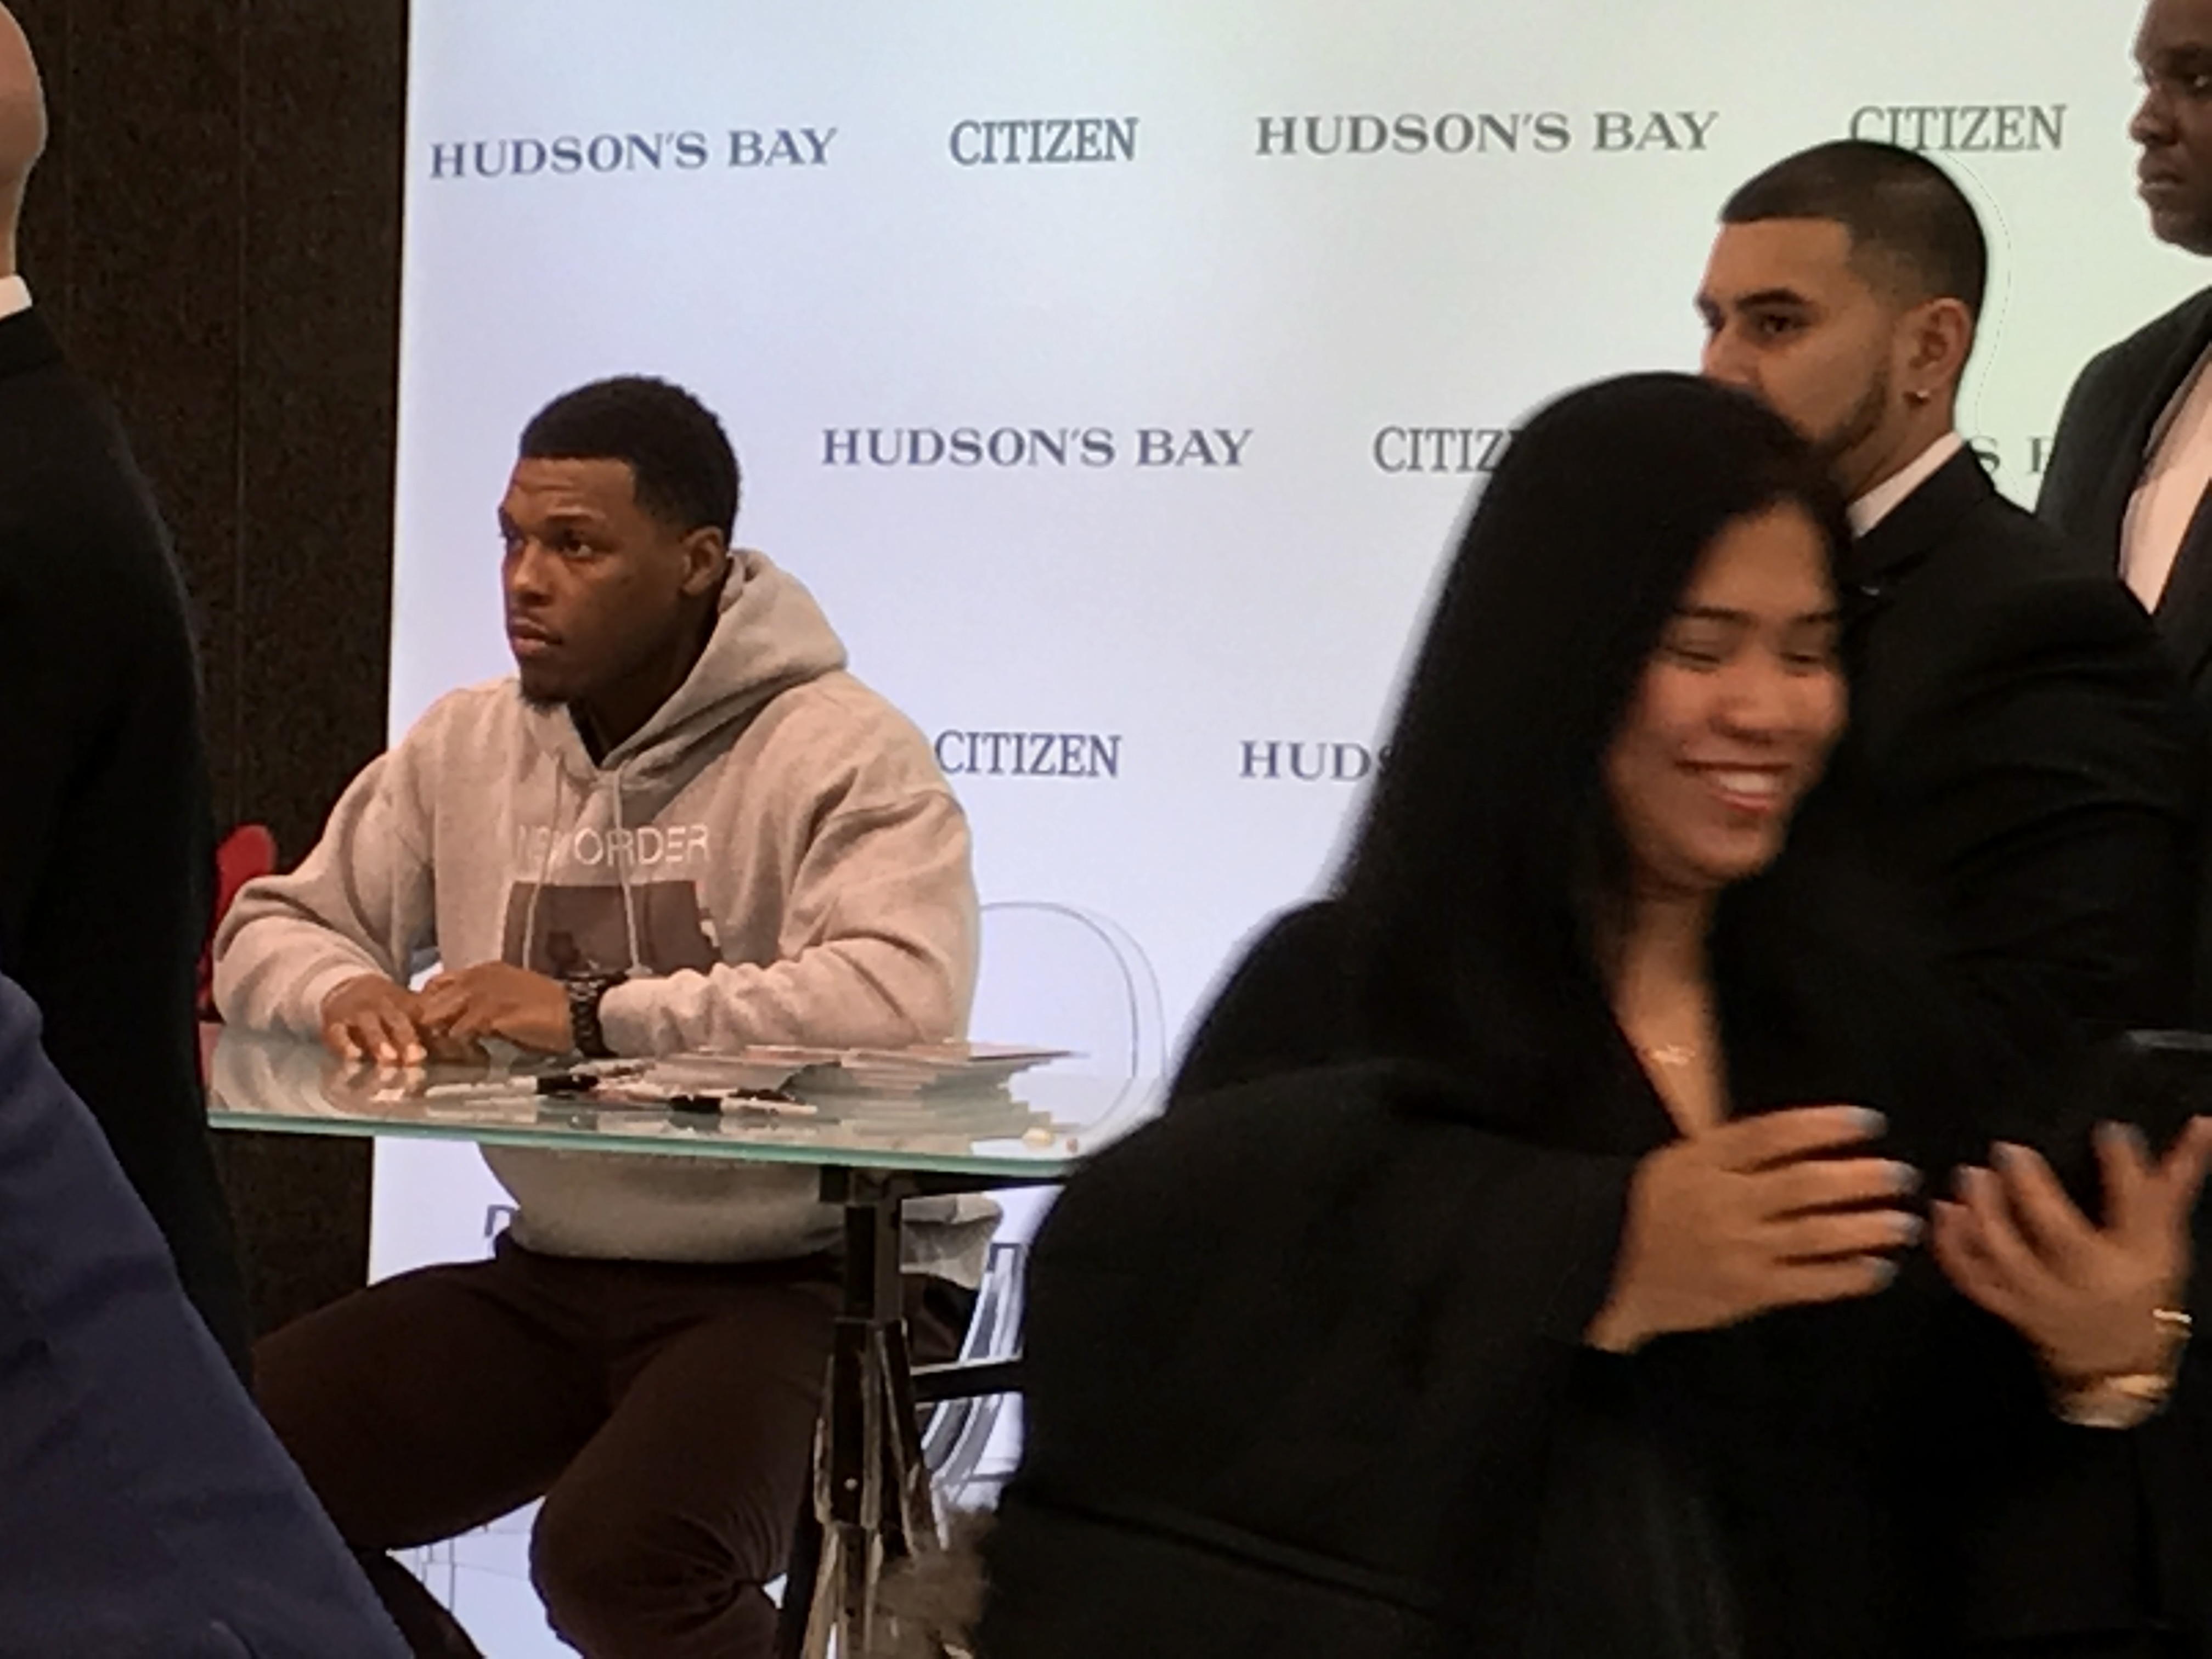 Kyle Lowry x Citizen Nighthawk Event at Hudson's Bay